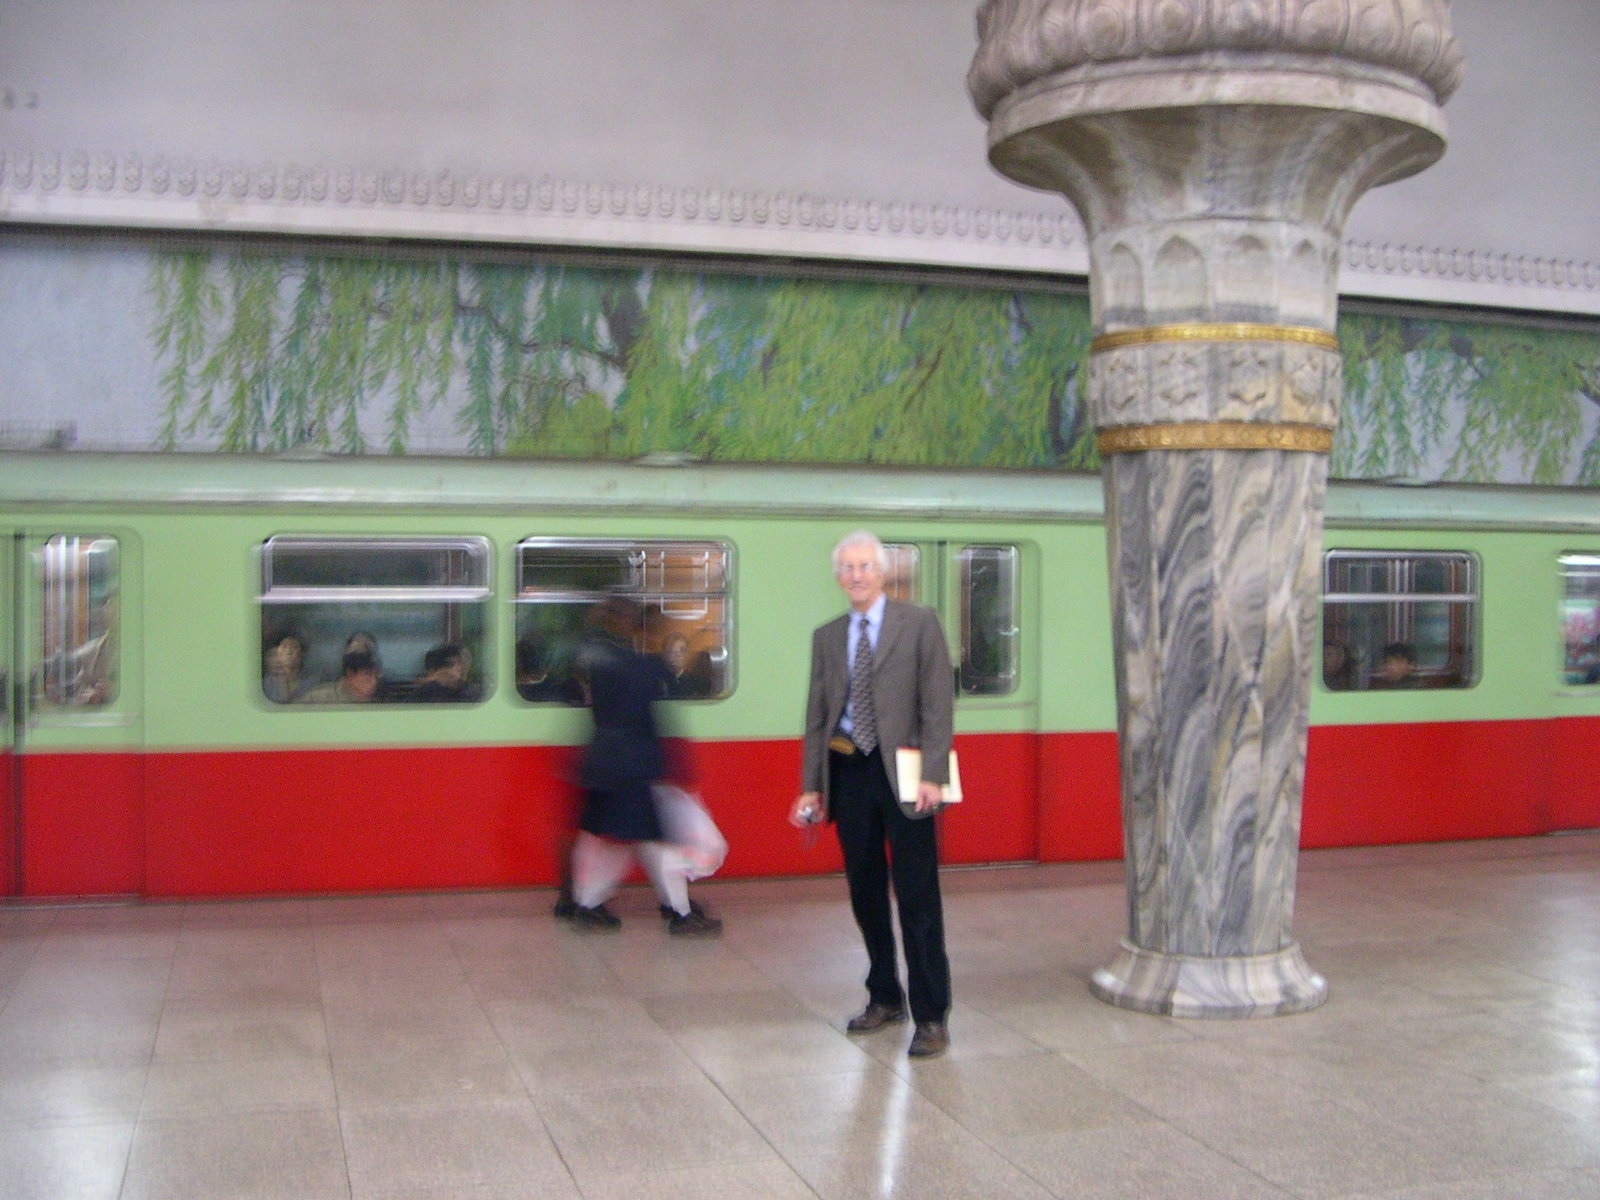 Man standing on a marble-paved platform in front of a green and red subway car